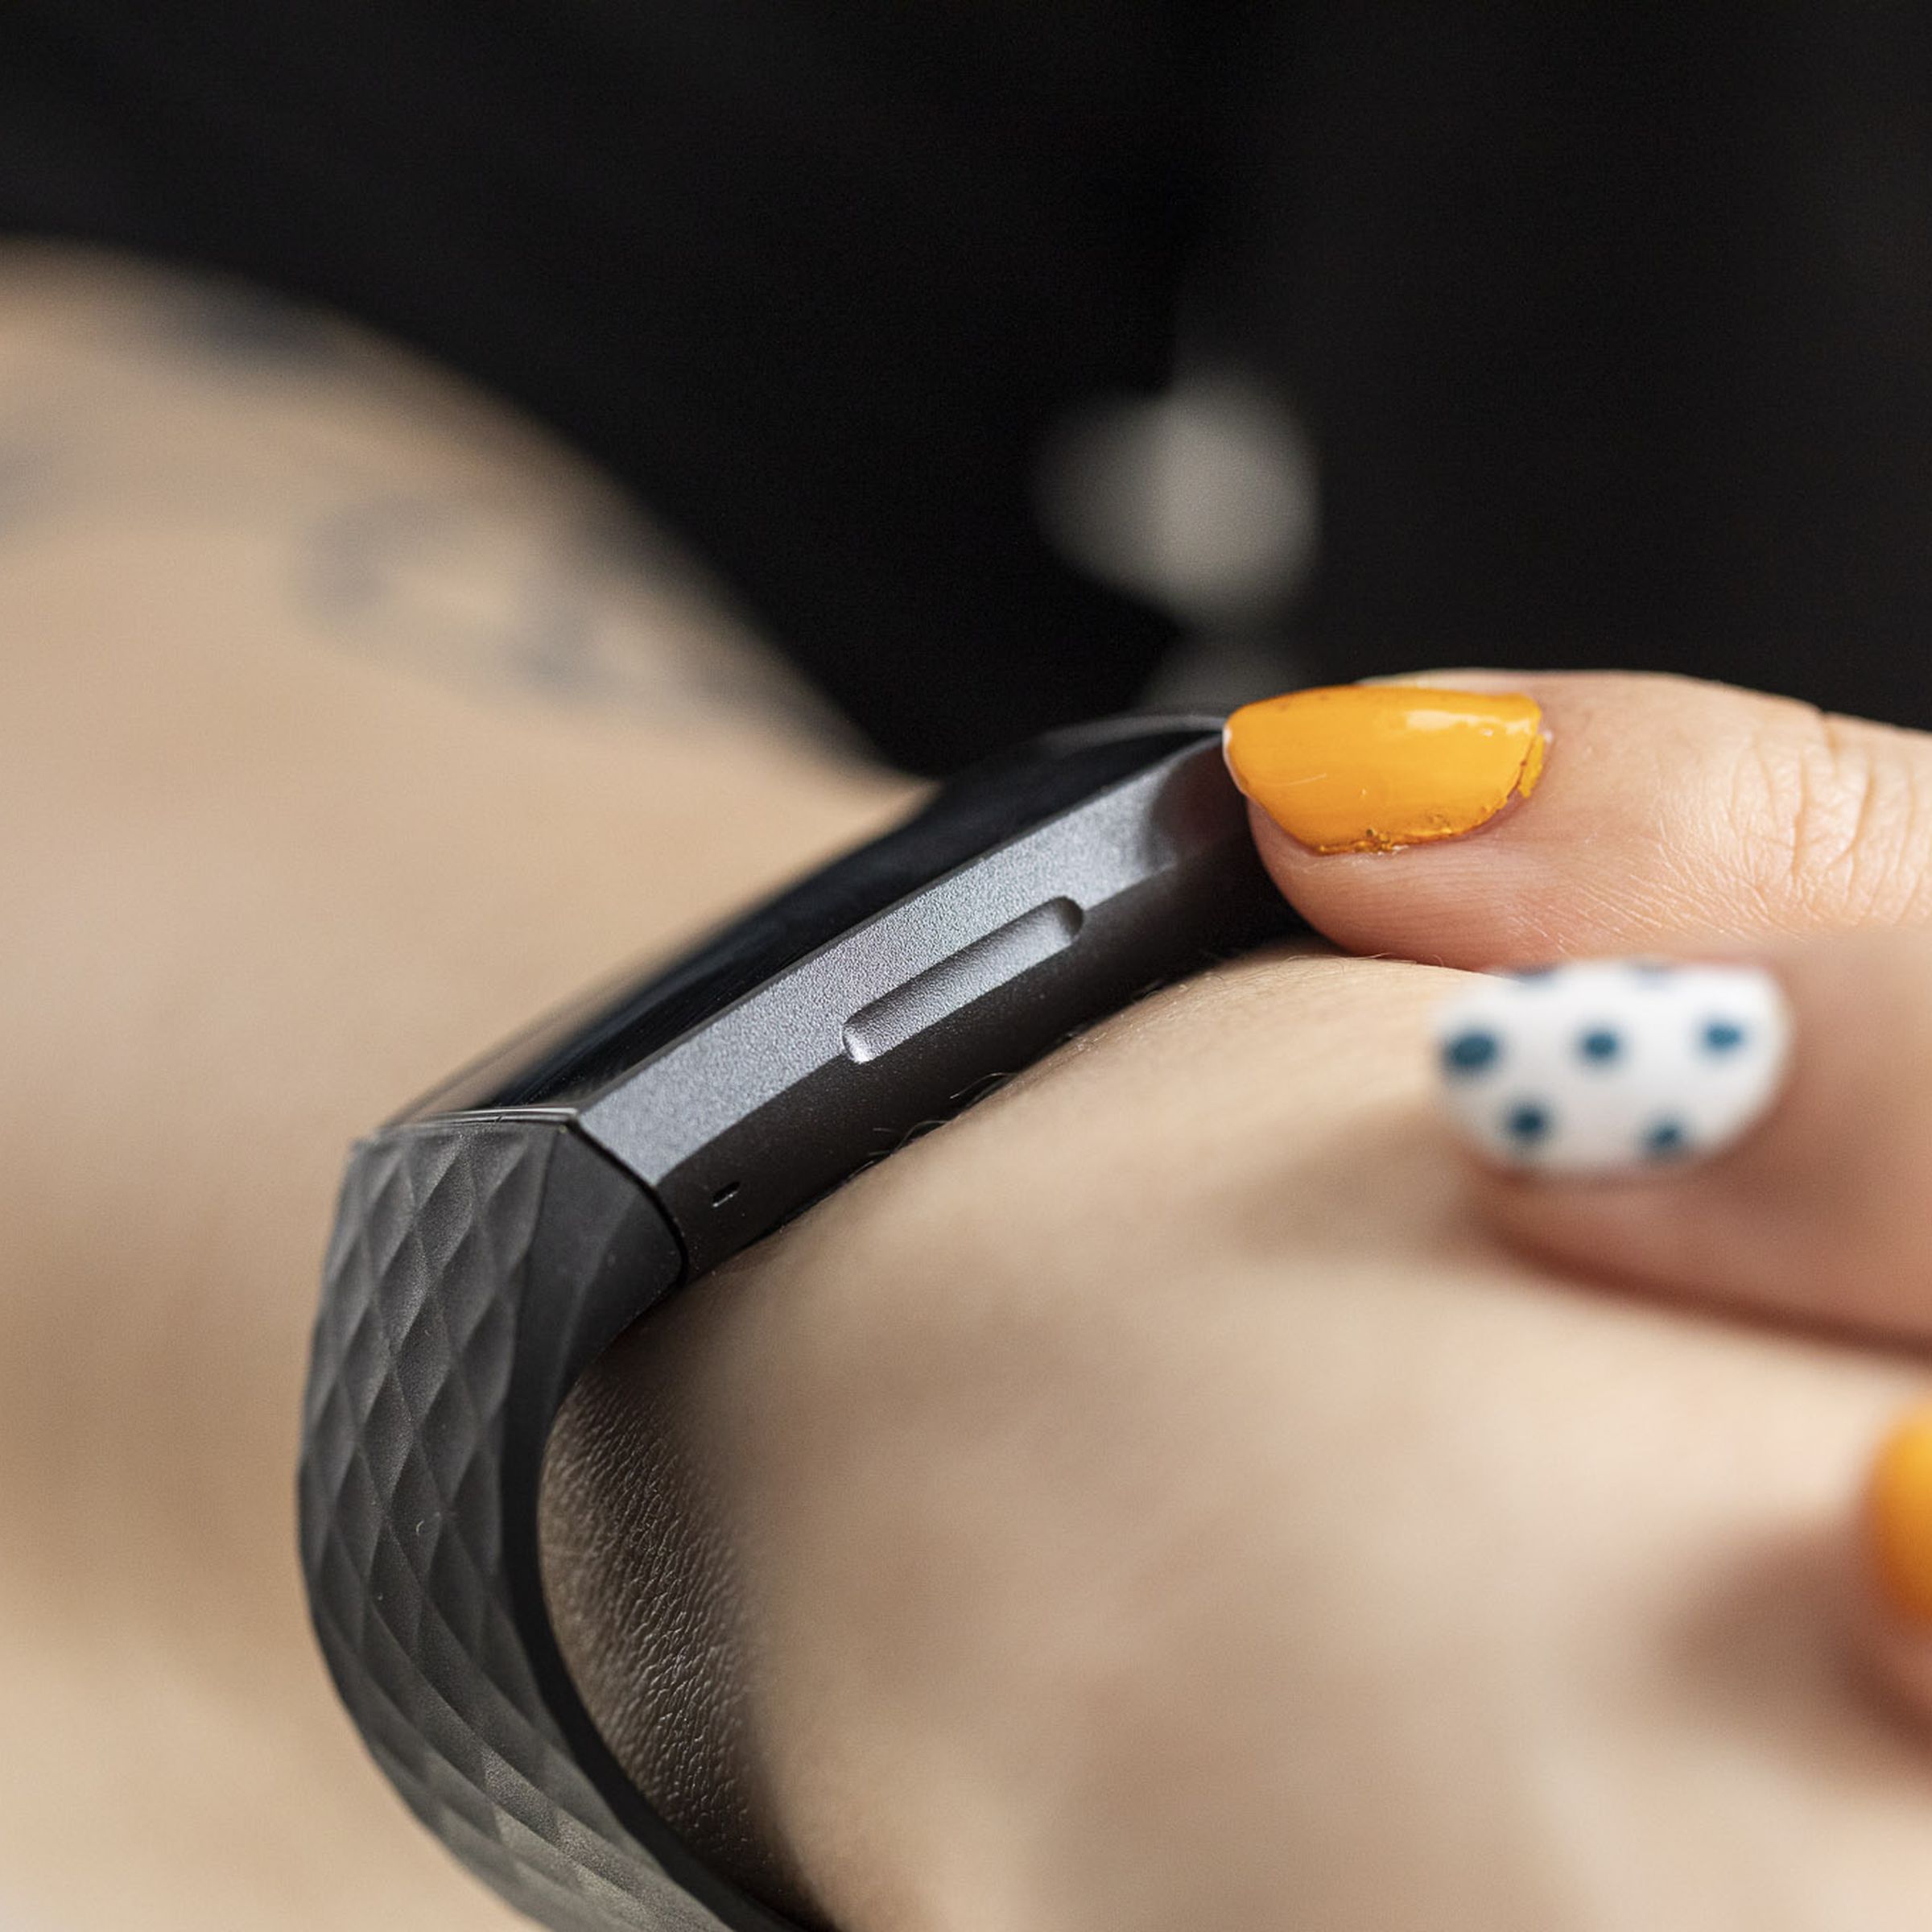 Person with colorful manicure using the Fitbit Charge 3 with a clear view of the inductive button.